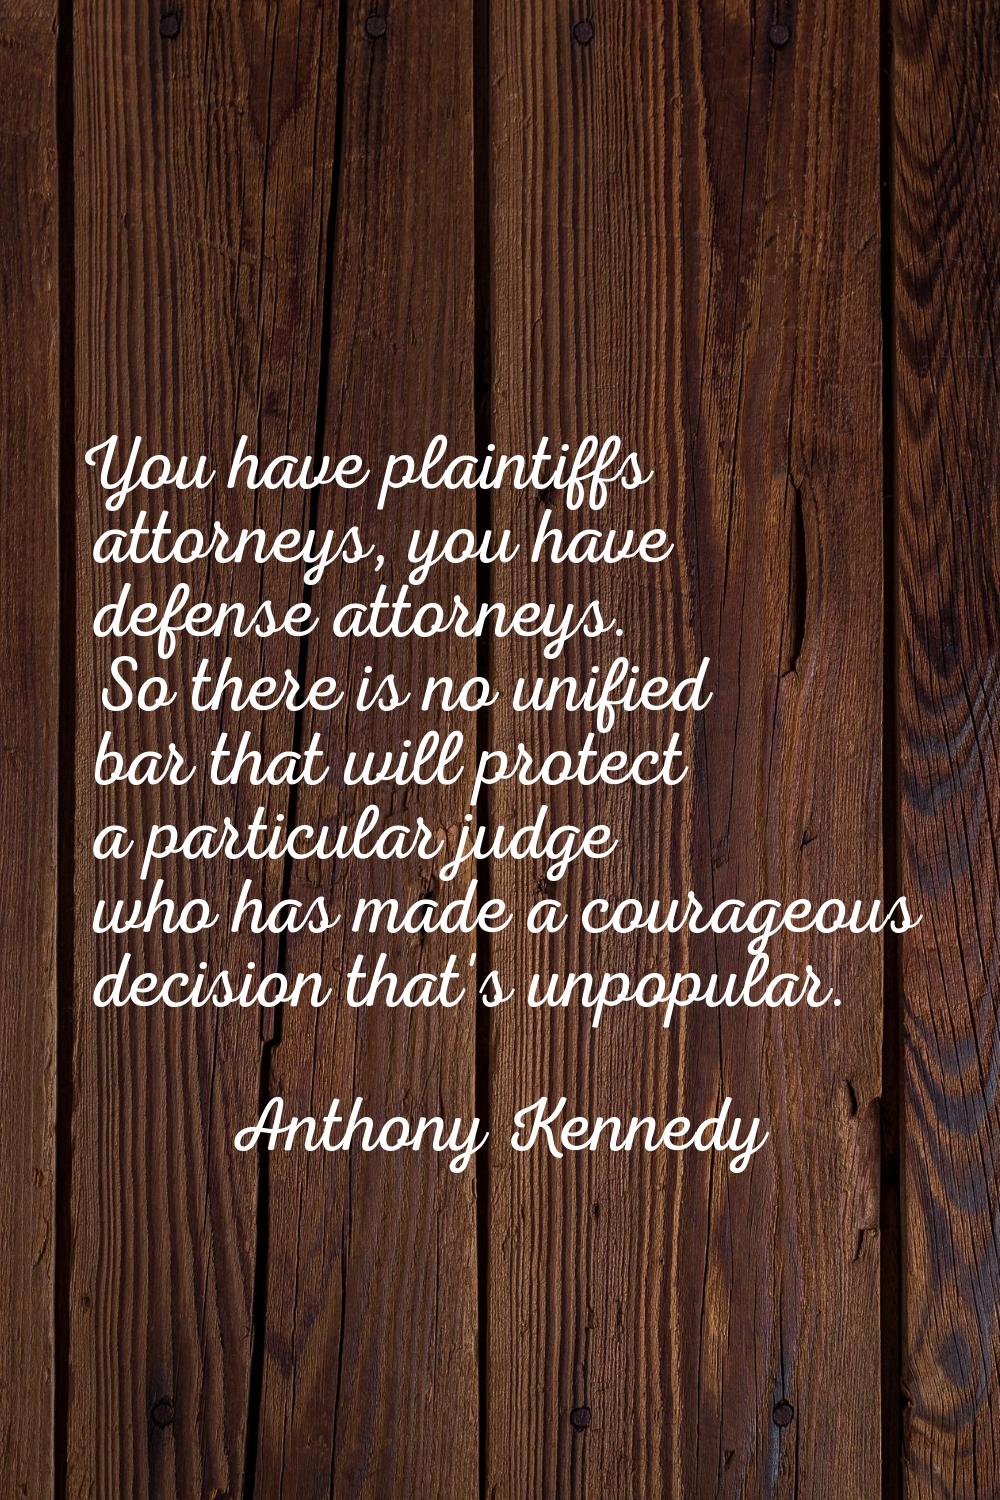 You have plaintiffs attorneys, you have defense attorneys. So there is no unified bar that will pro